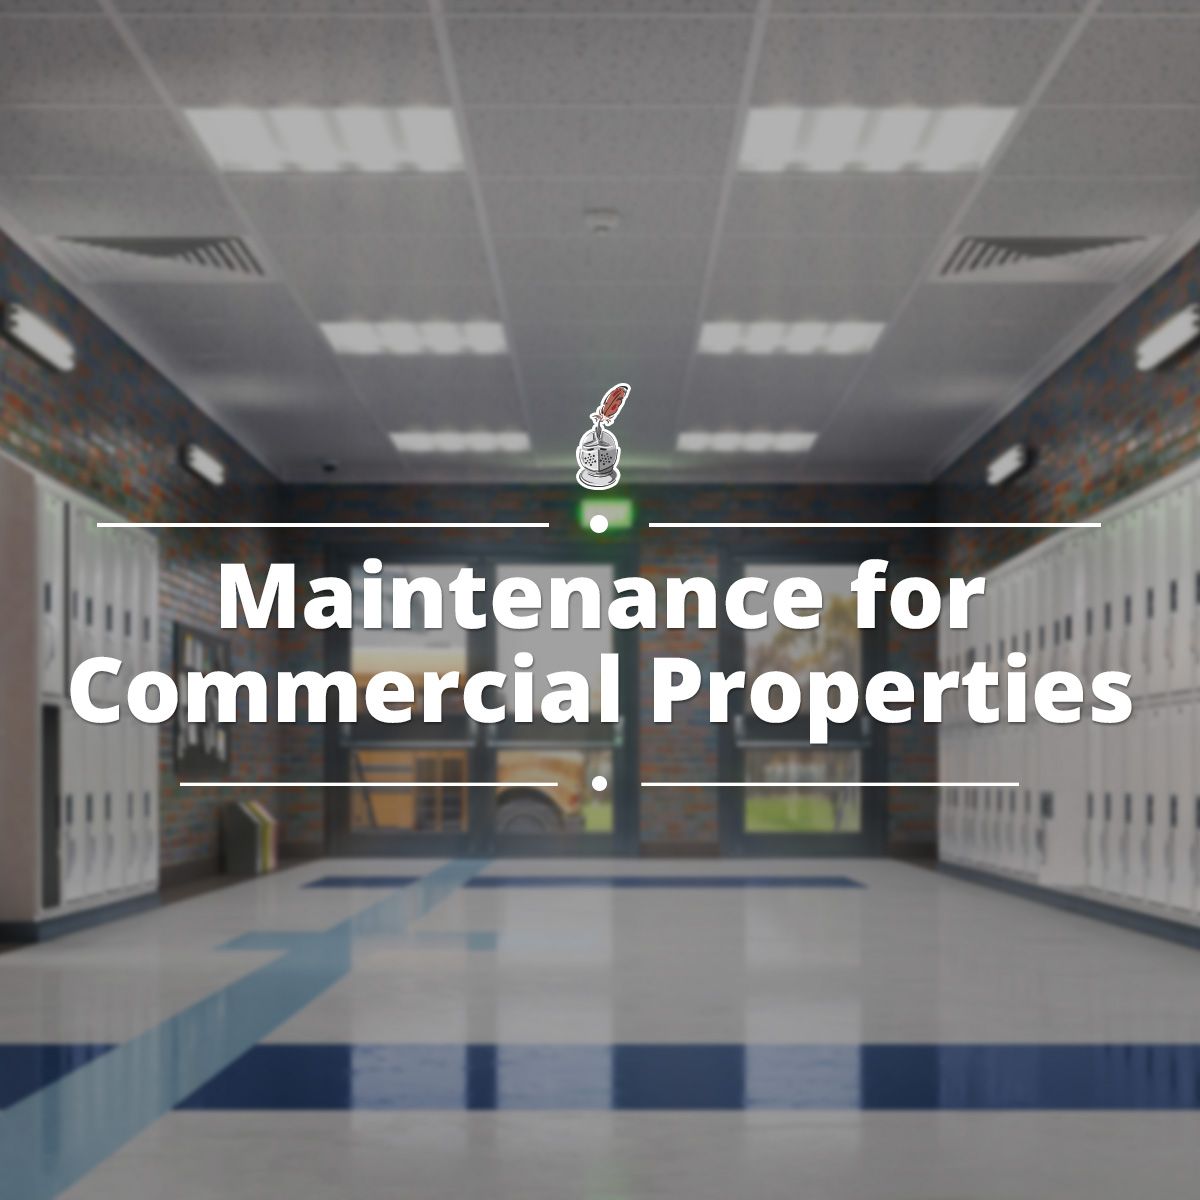 Maintenance for Commercial Properties